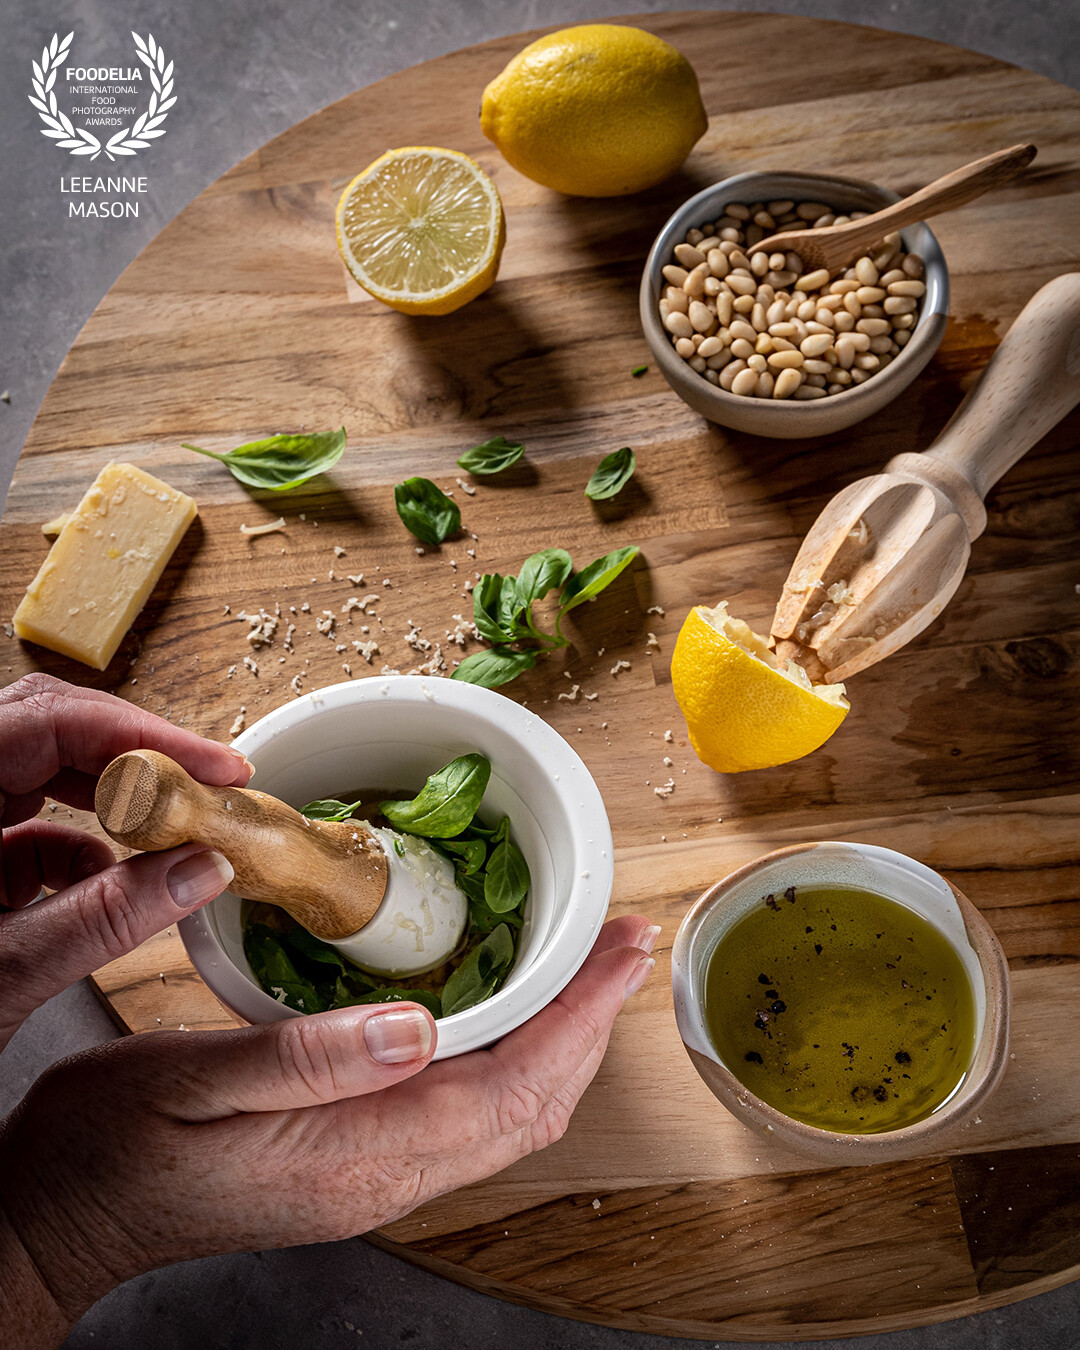 Creating something by hand is a mindful process. That's what I love about photography, being immersed in the moment.  By focusing on the manual muddling of some fresh pesto in a mortar and pestle is a methodical feeling and helps you savor the process and enjoy the end result so much more.  <br />
<br />
This was shot at a 45 degree angle with Godox AD300 lighting with a 60cm modifier and grid to create the illusion of morning light.